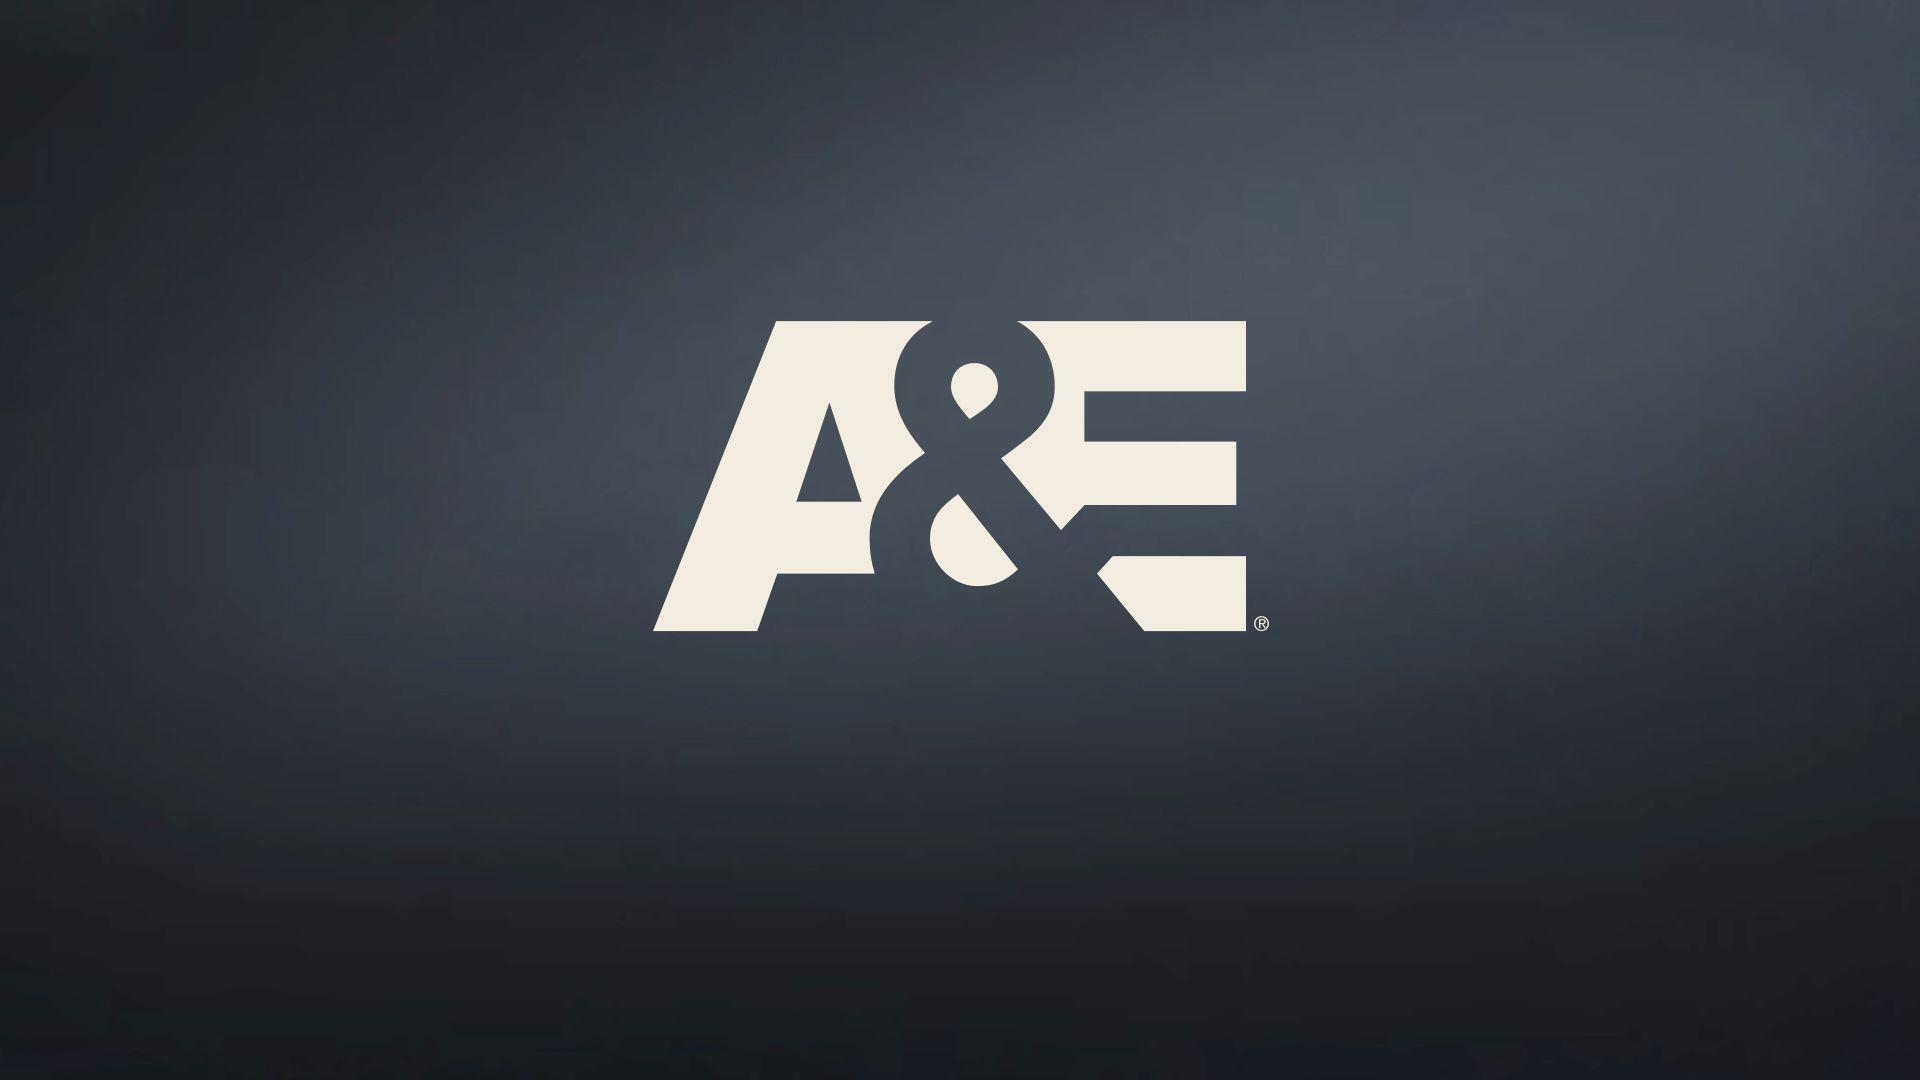 TV Y Logo - A&E. Watch Full Episodes of Your Favorite Shows